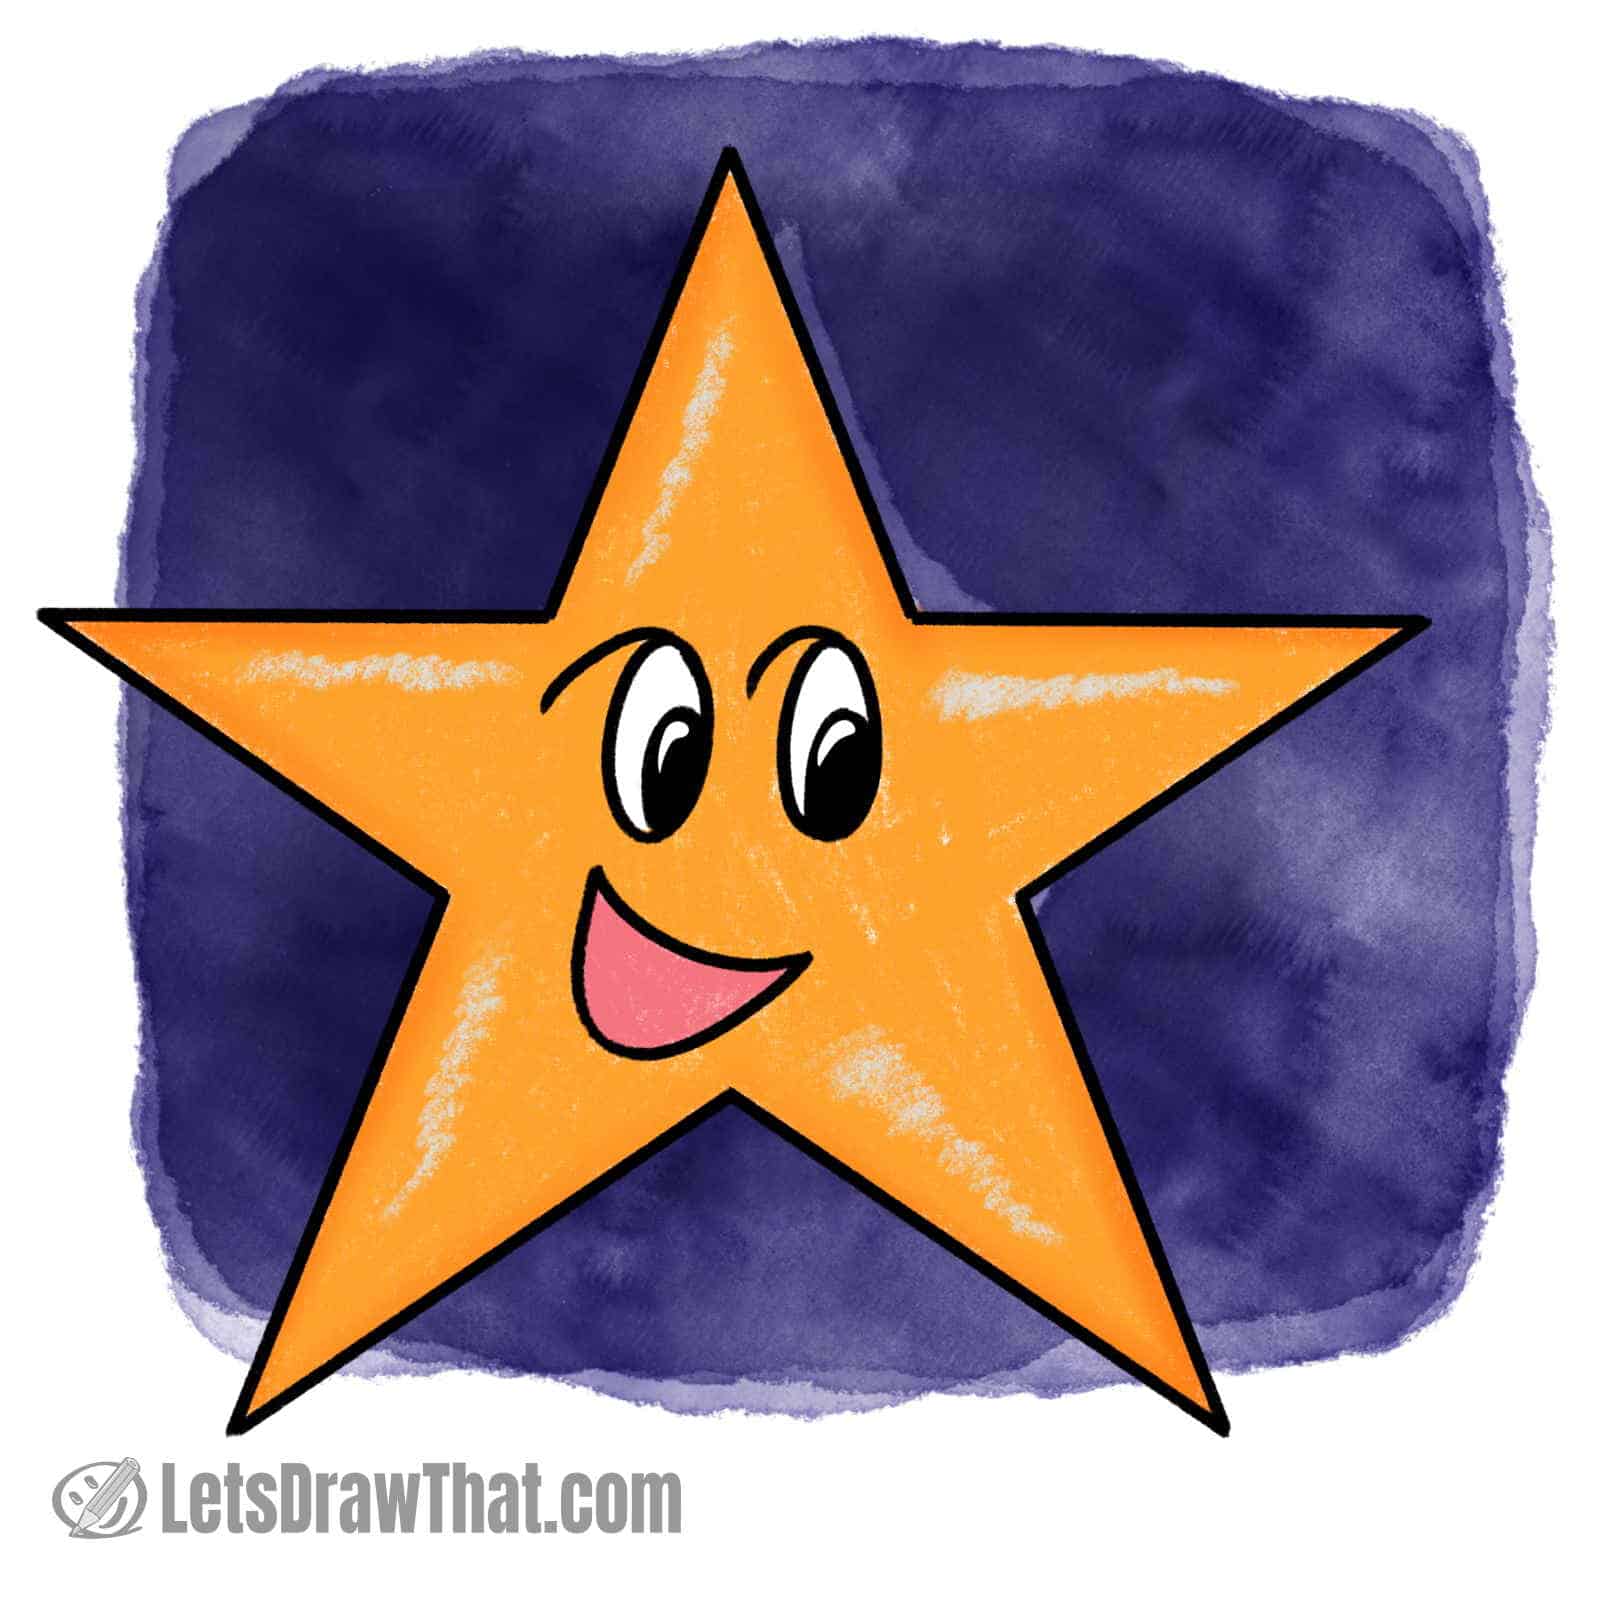 Star drawing coloured-in